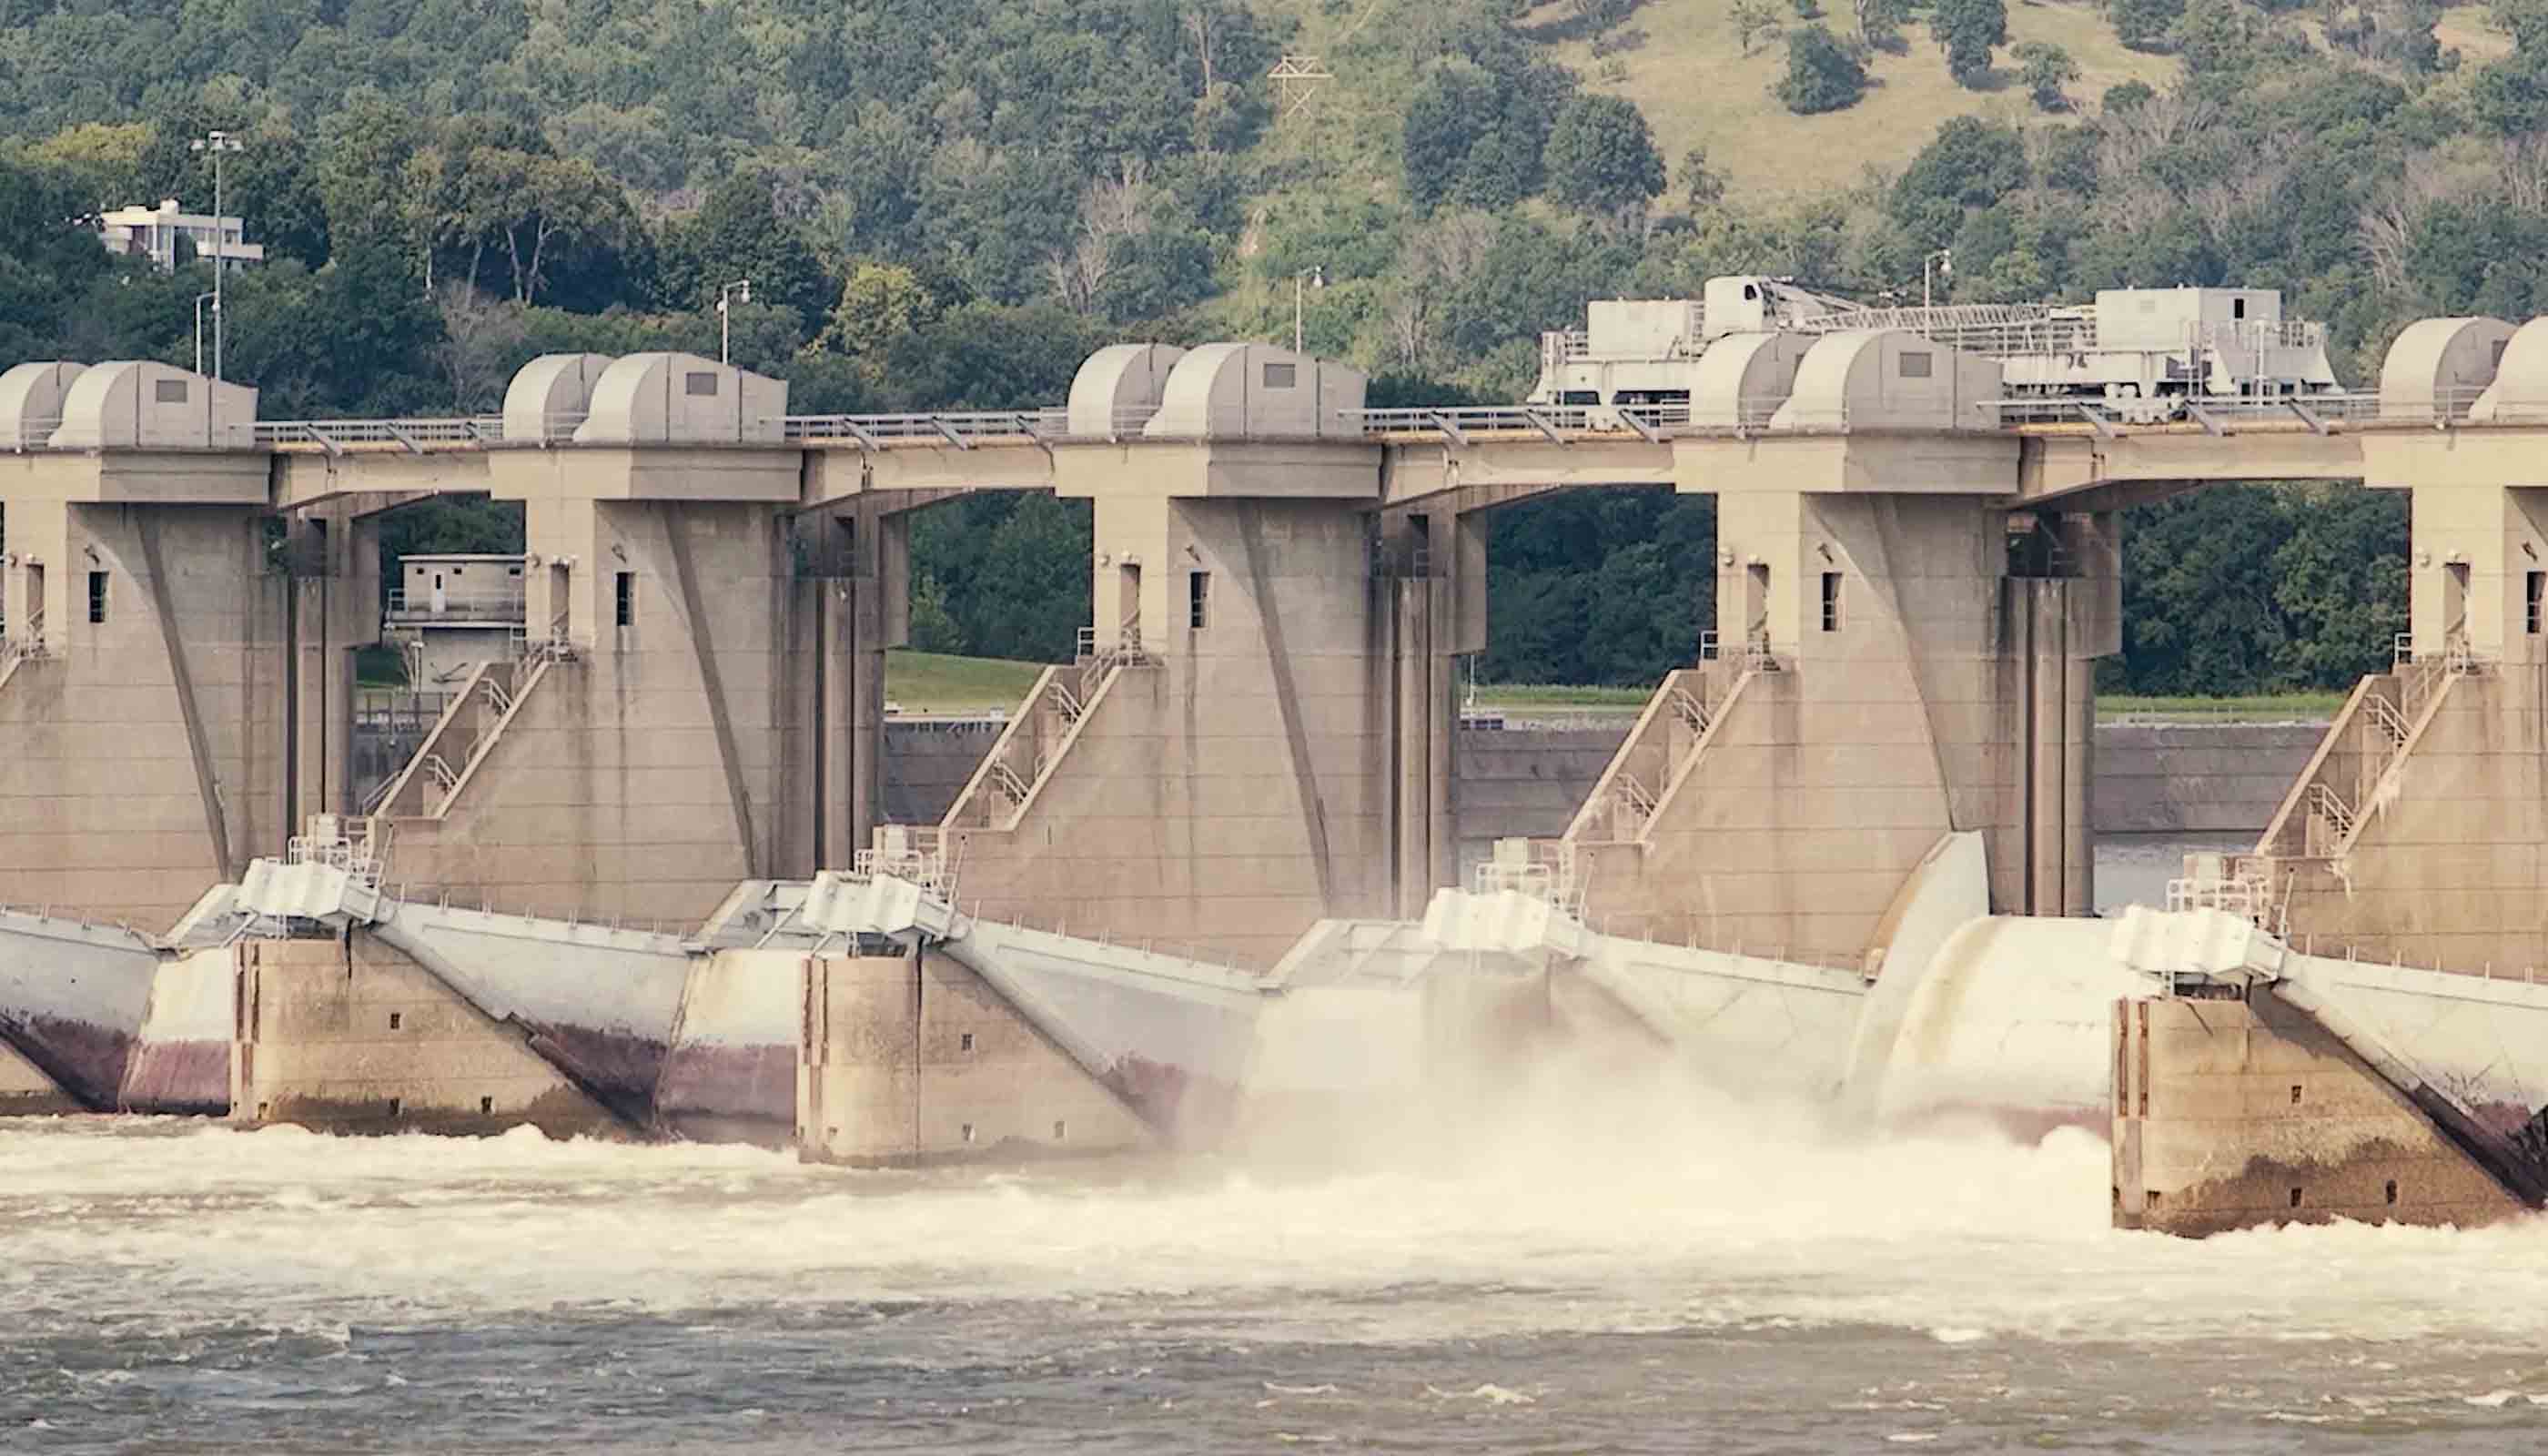 Celebrating over 100 years of hydropower & dams